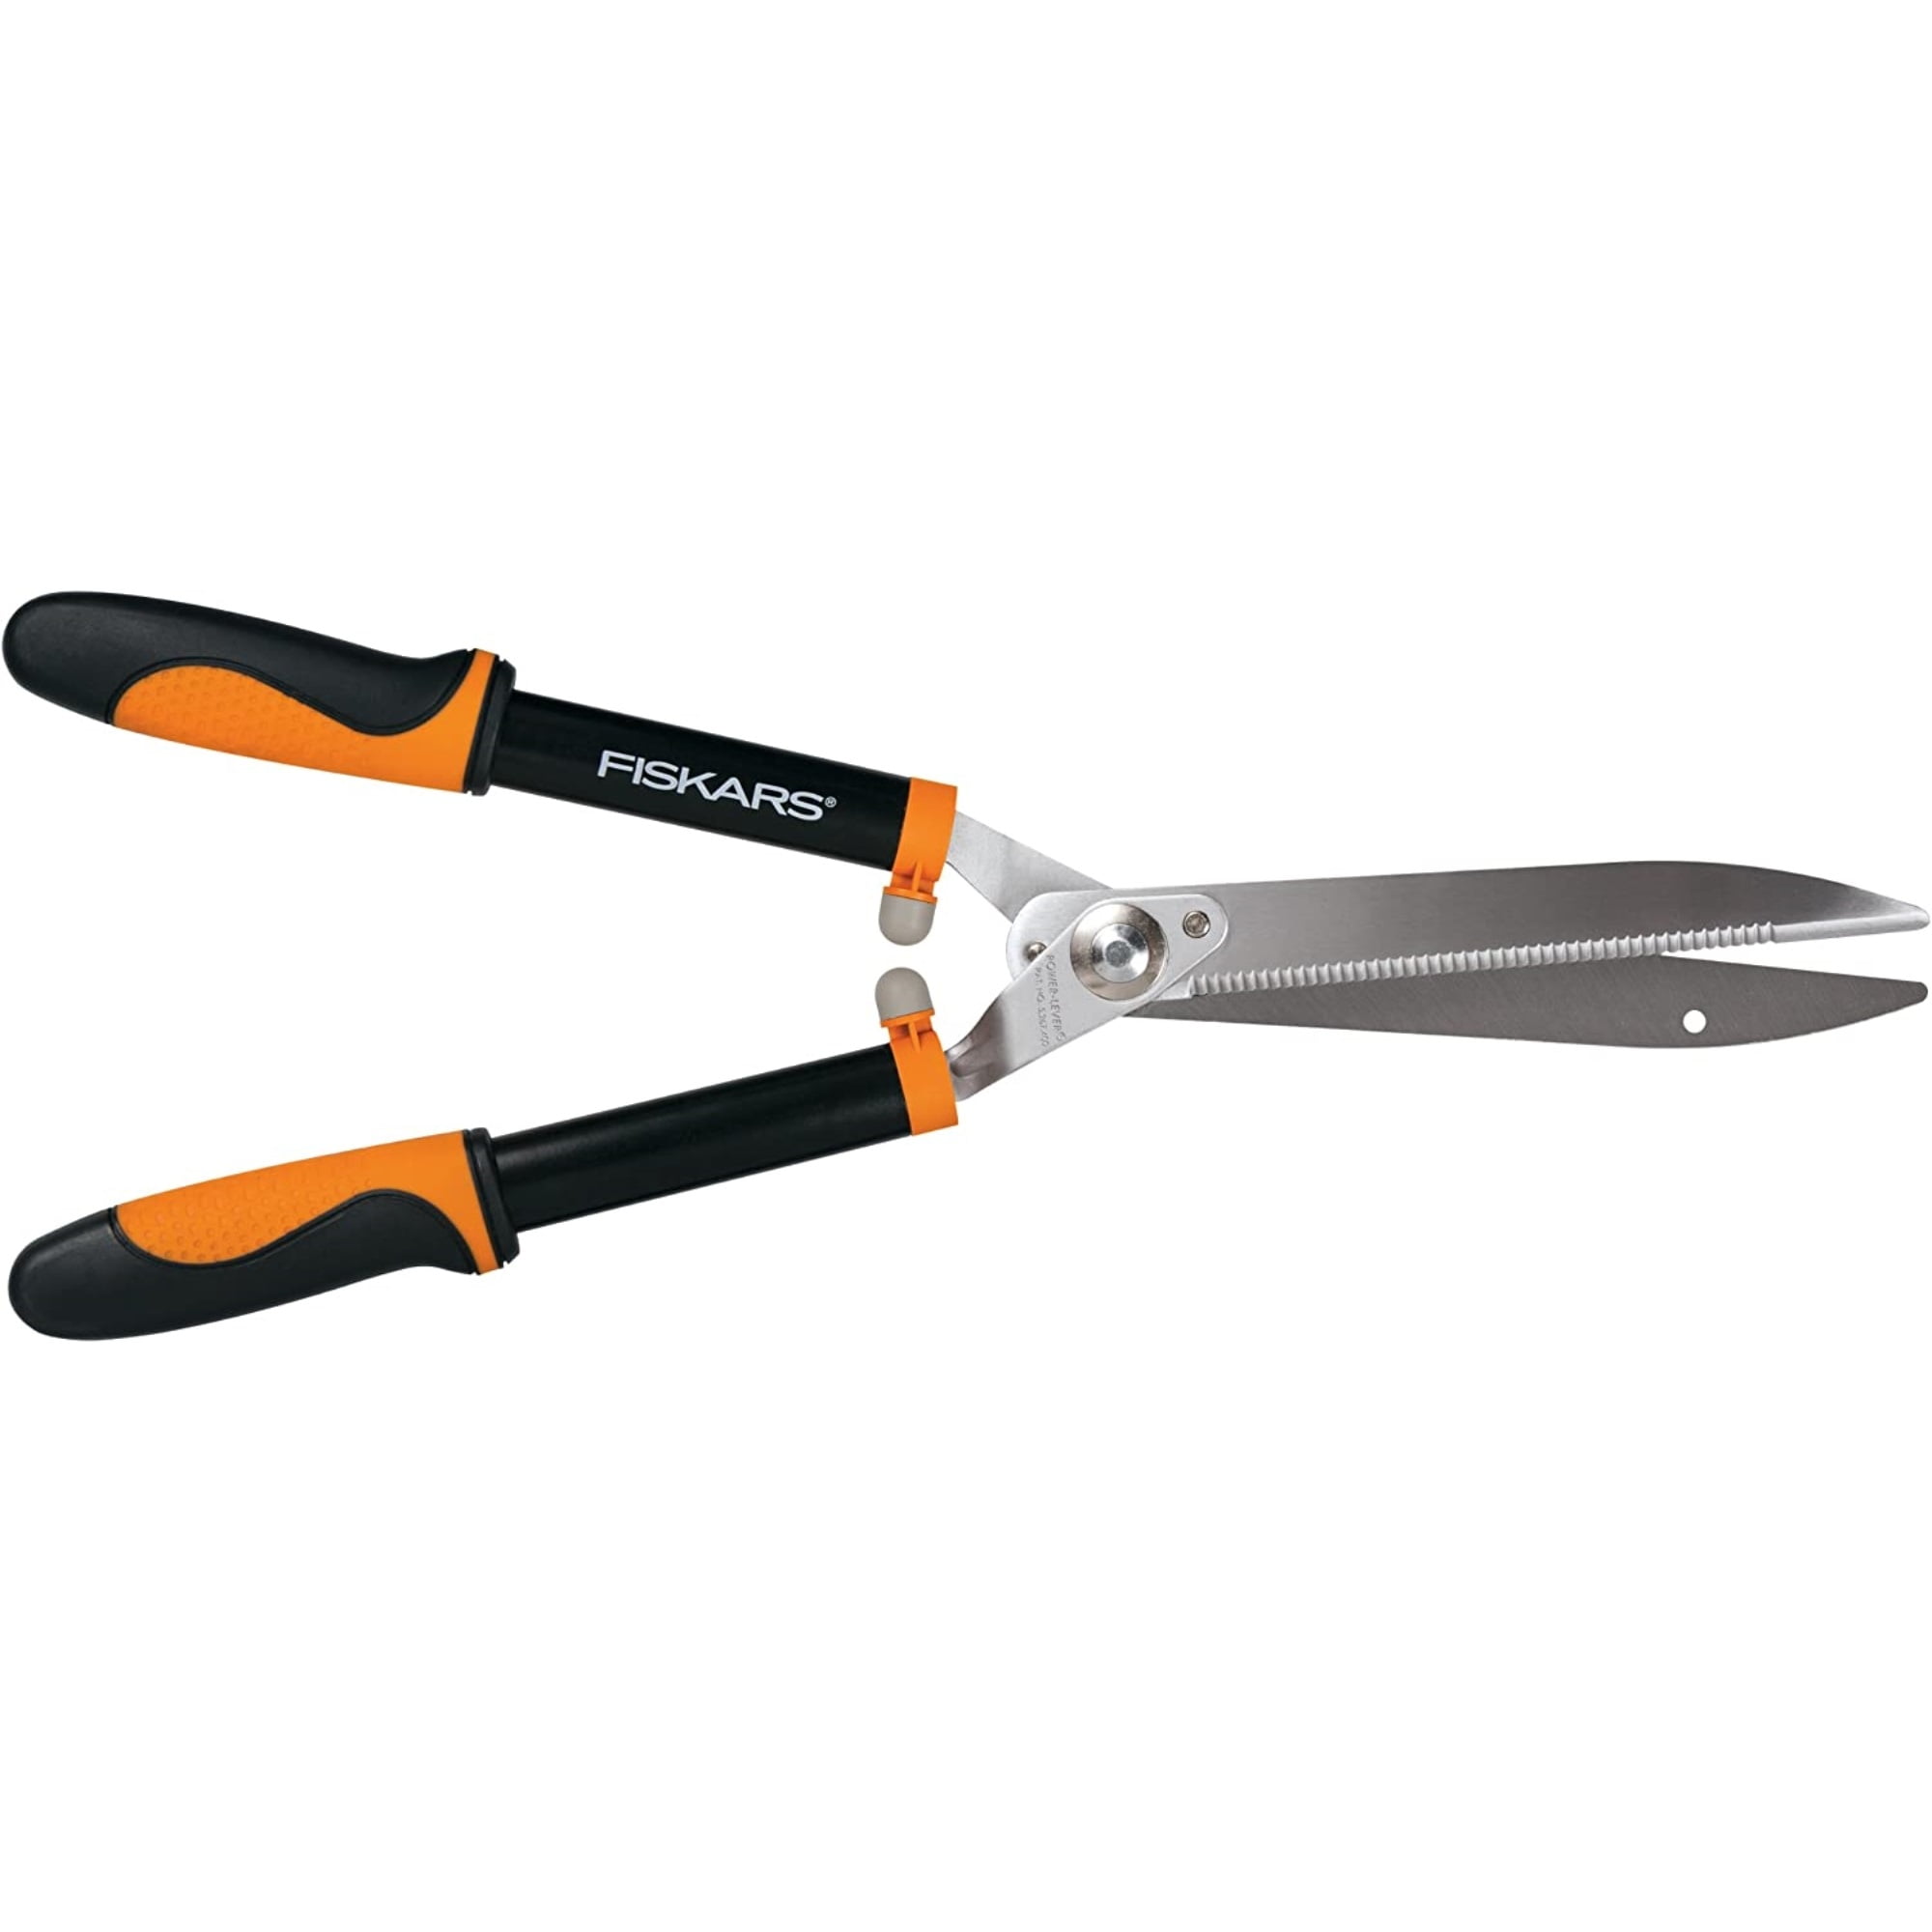 What do you think about Fiskars tools, tell us about your bush tools :  r/Tools